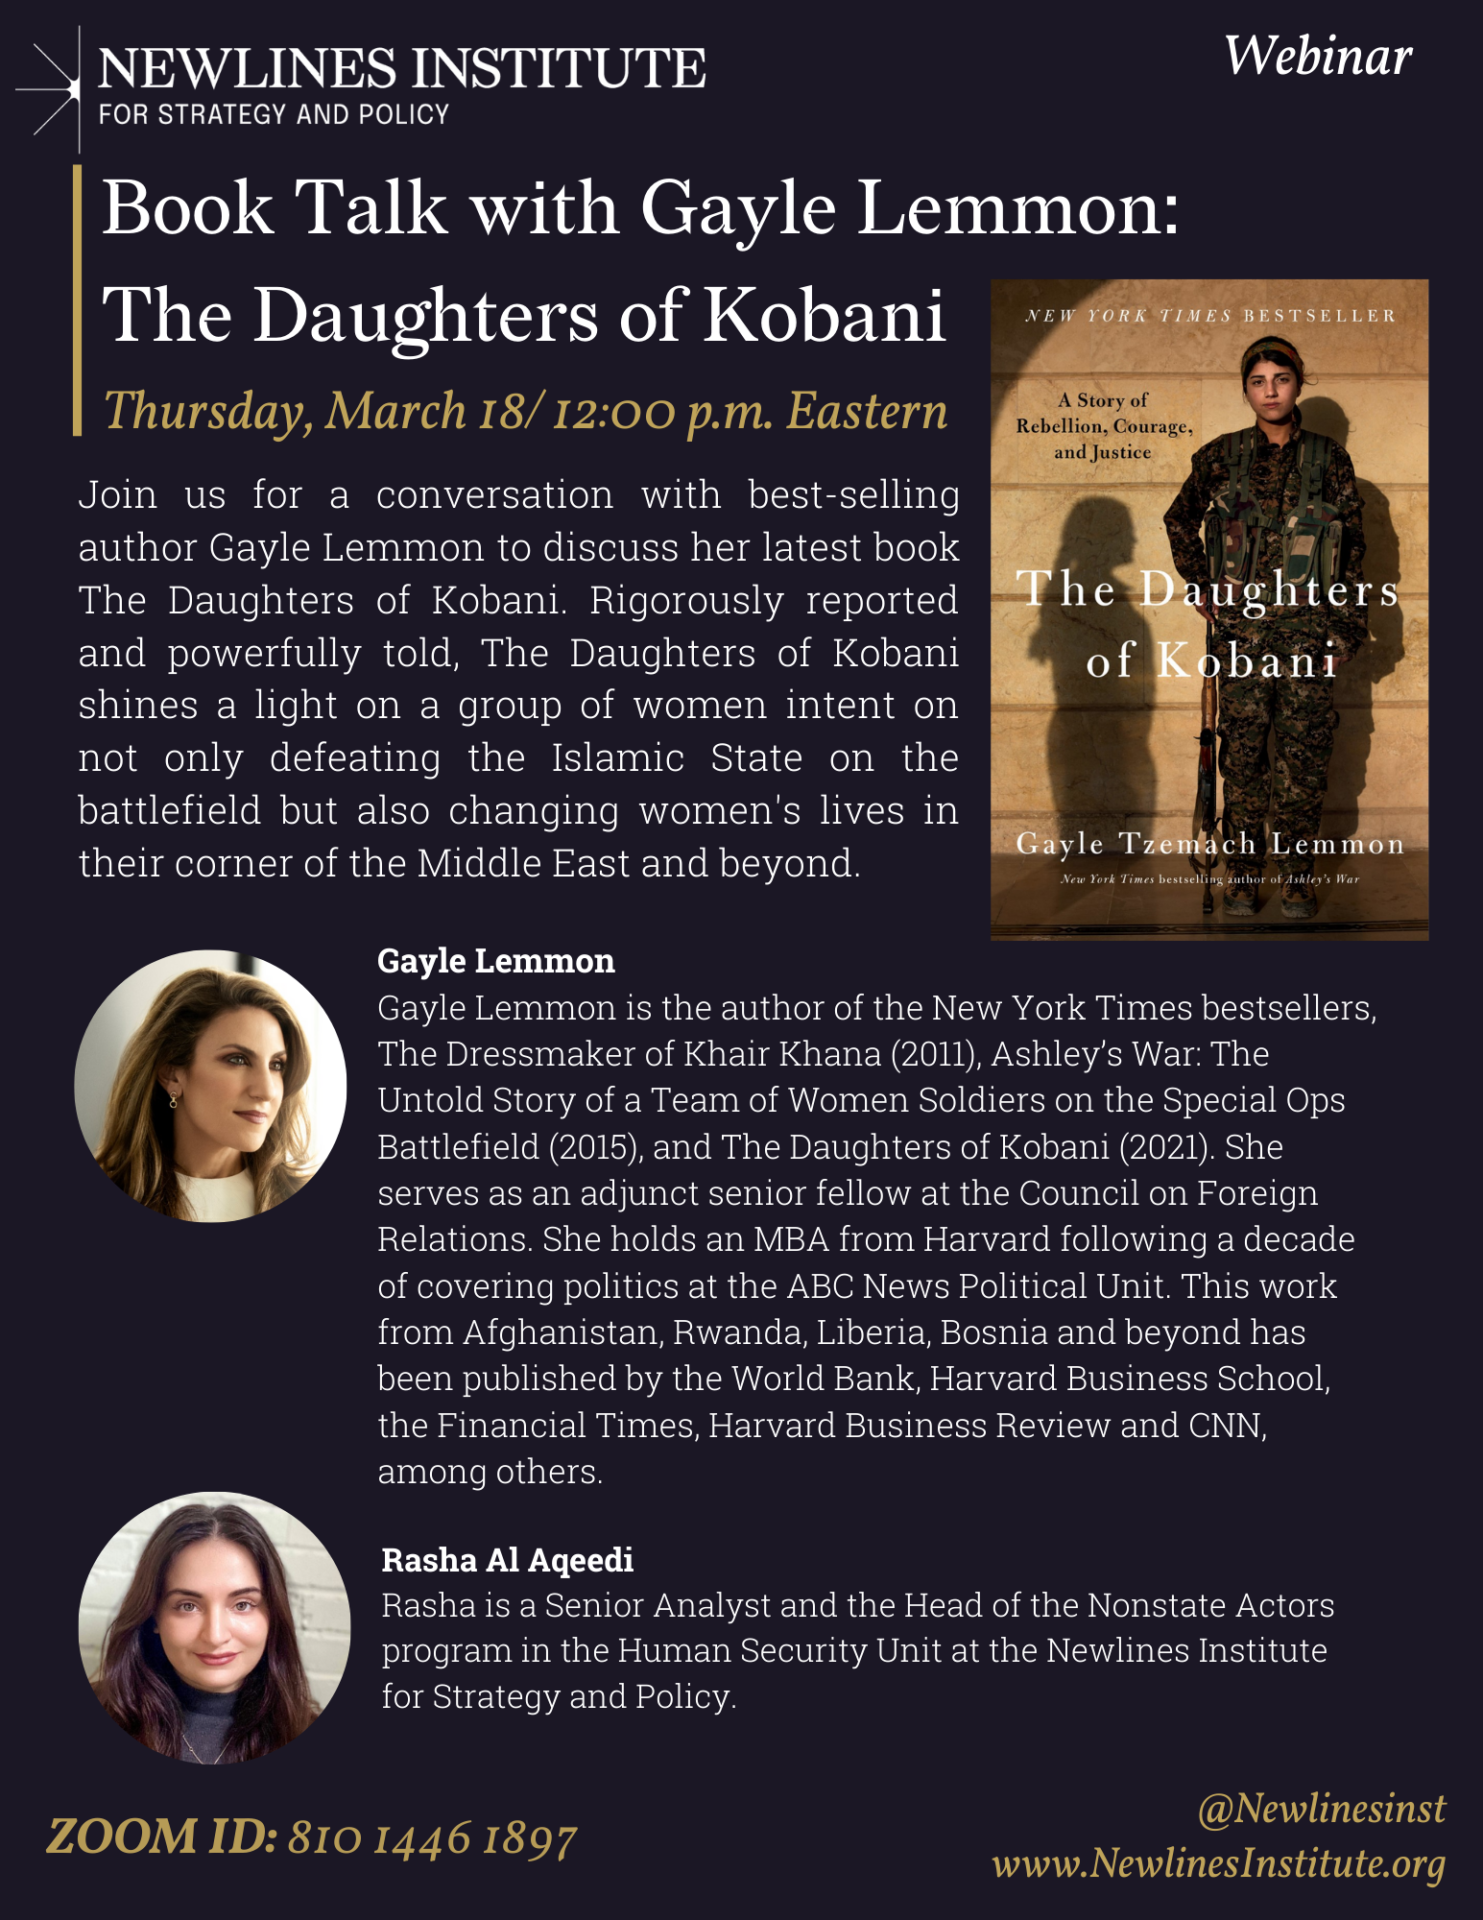 Book Talk with Gayle Lemmon: The Daughters of Kobani